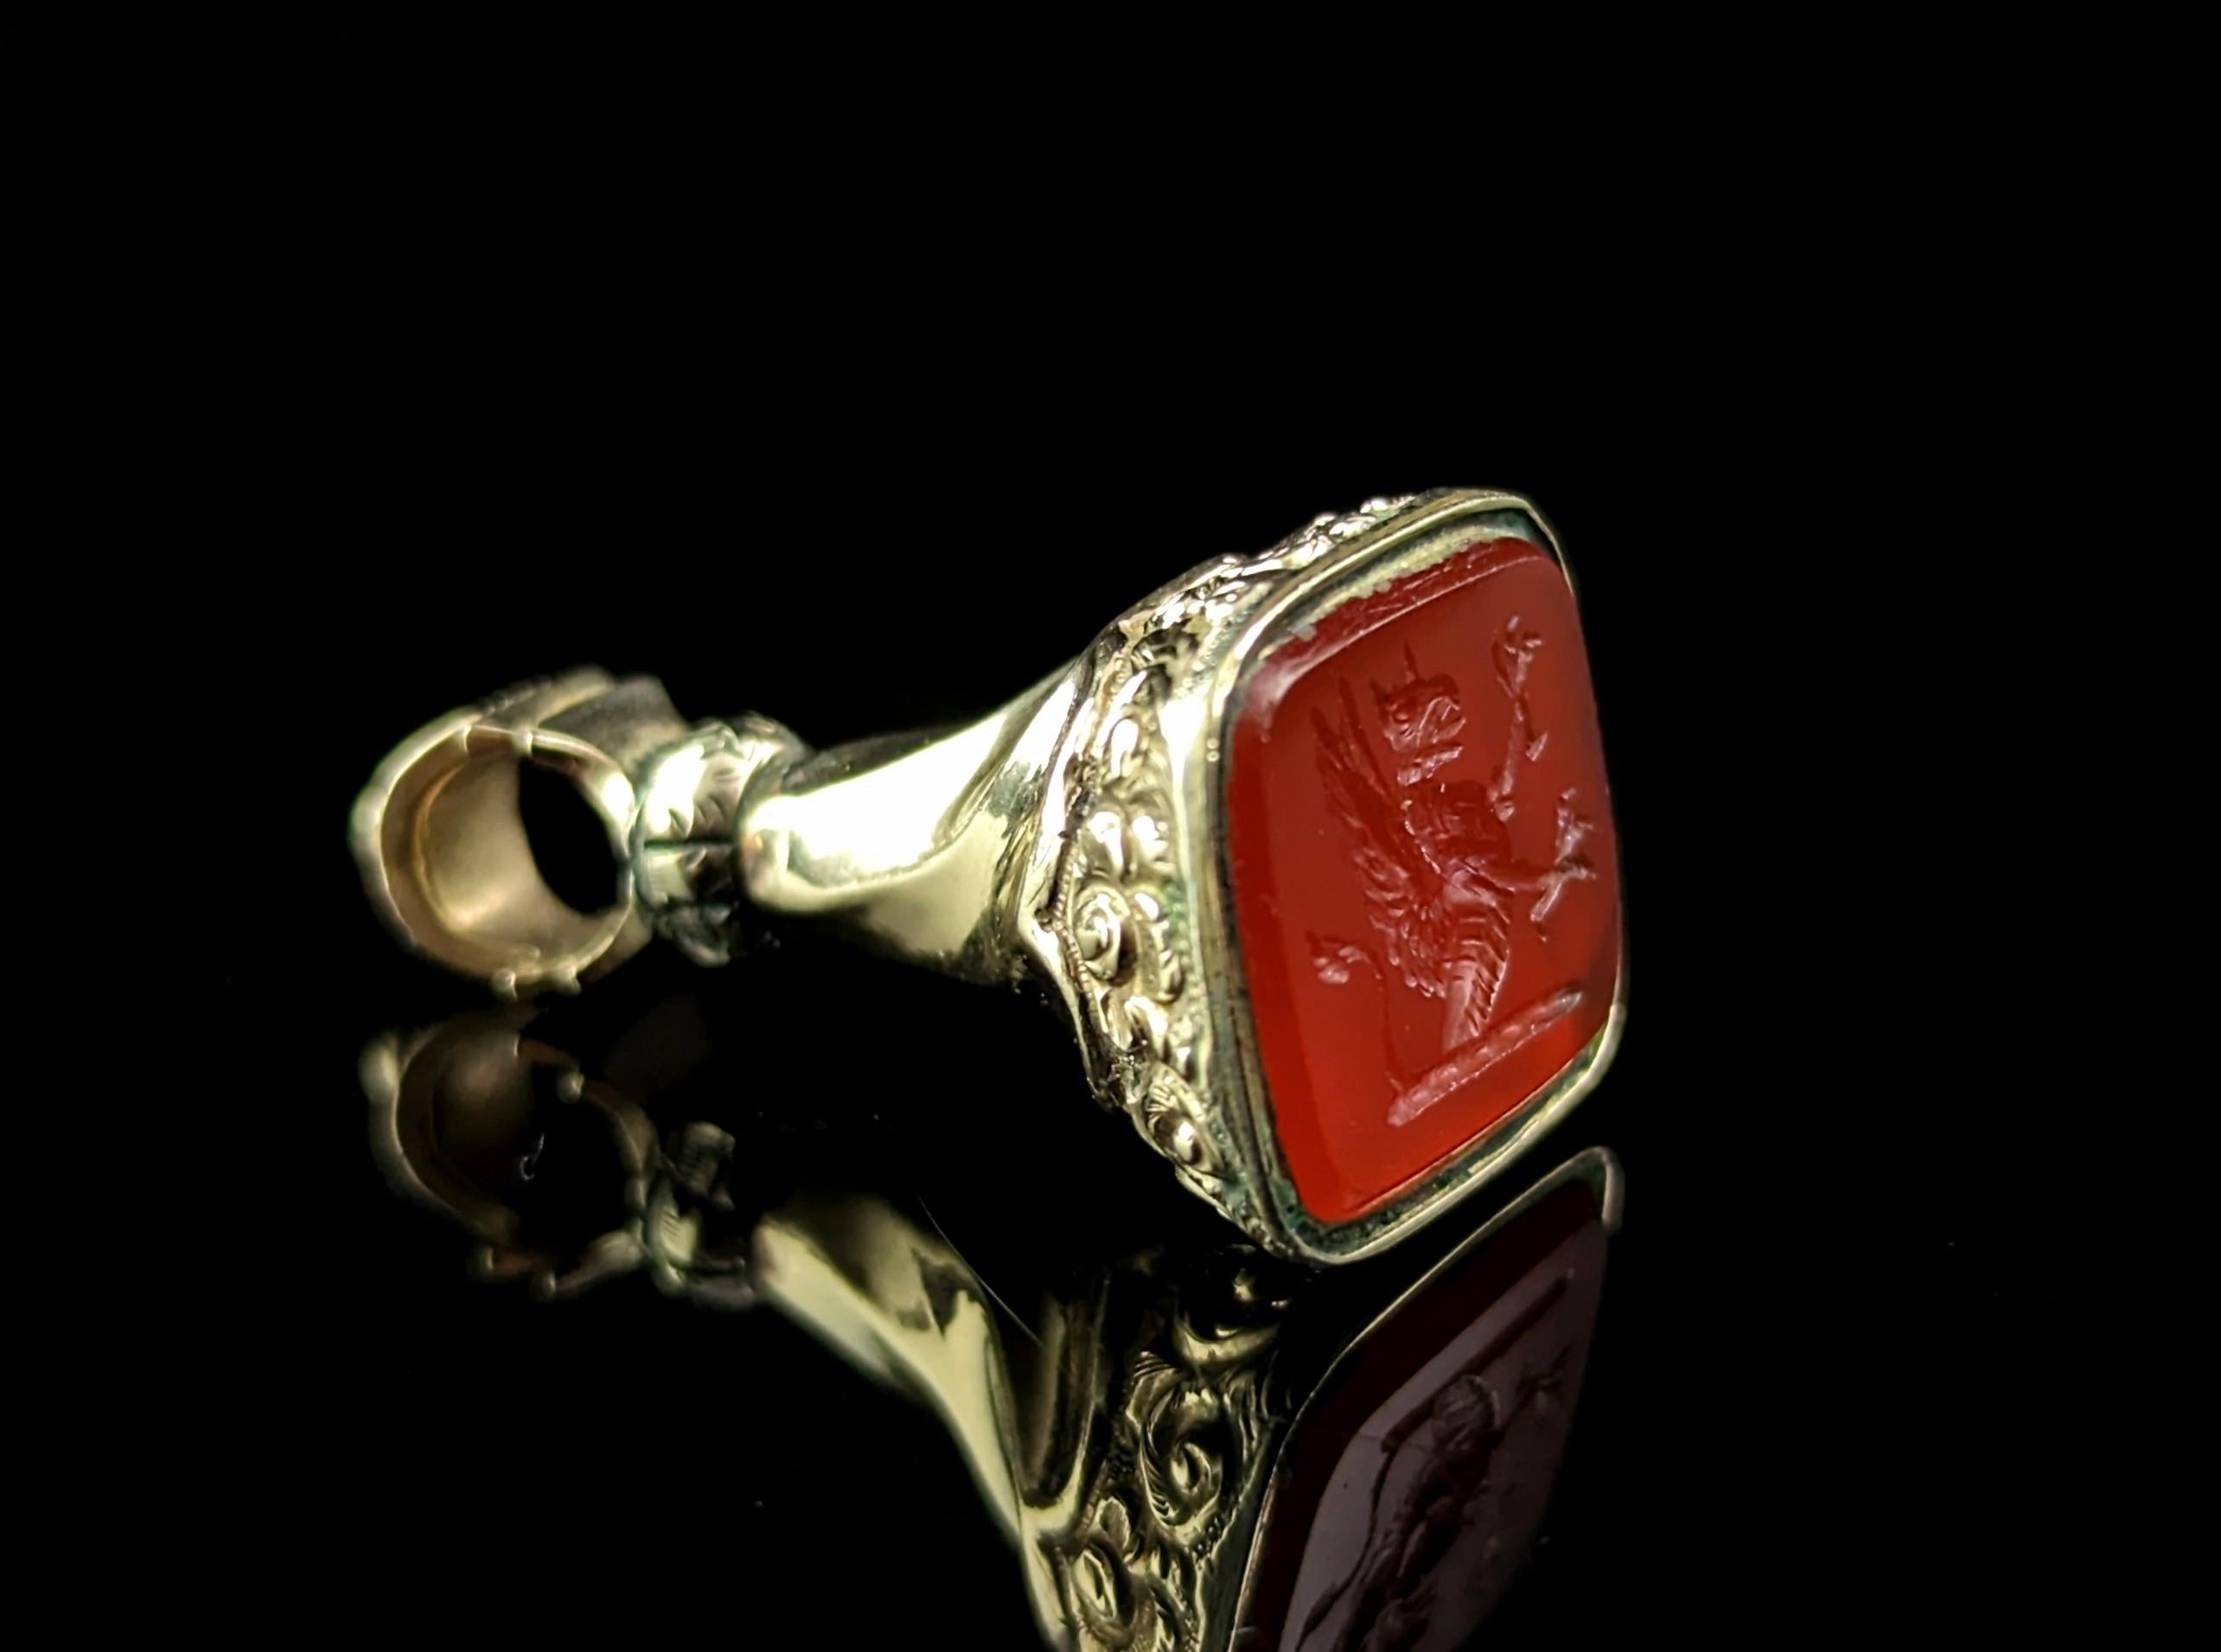 There is something quite special about antique seal fobs, not only are they beautiful but they are also functional.

This fine Victorian intaglio seal fob is crafted in 9ct gold with an interesting liquid swirl design and it has traditional chased